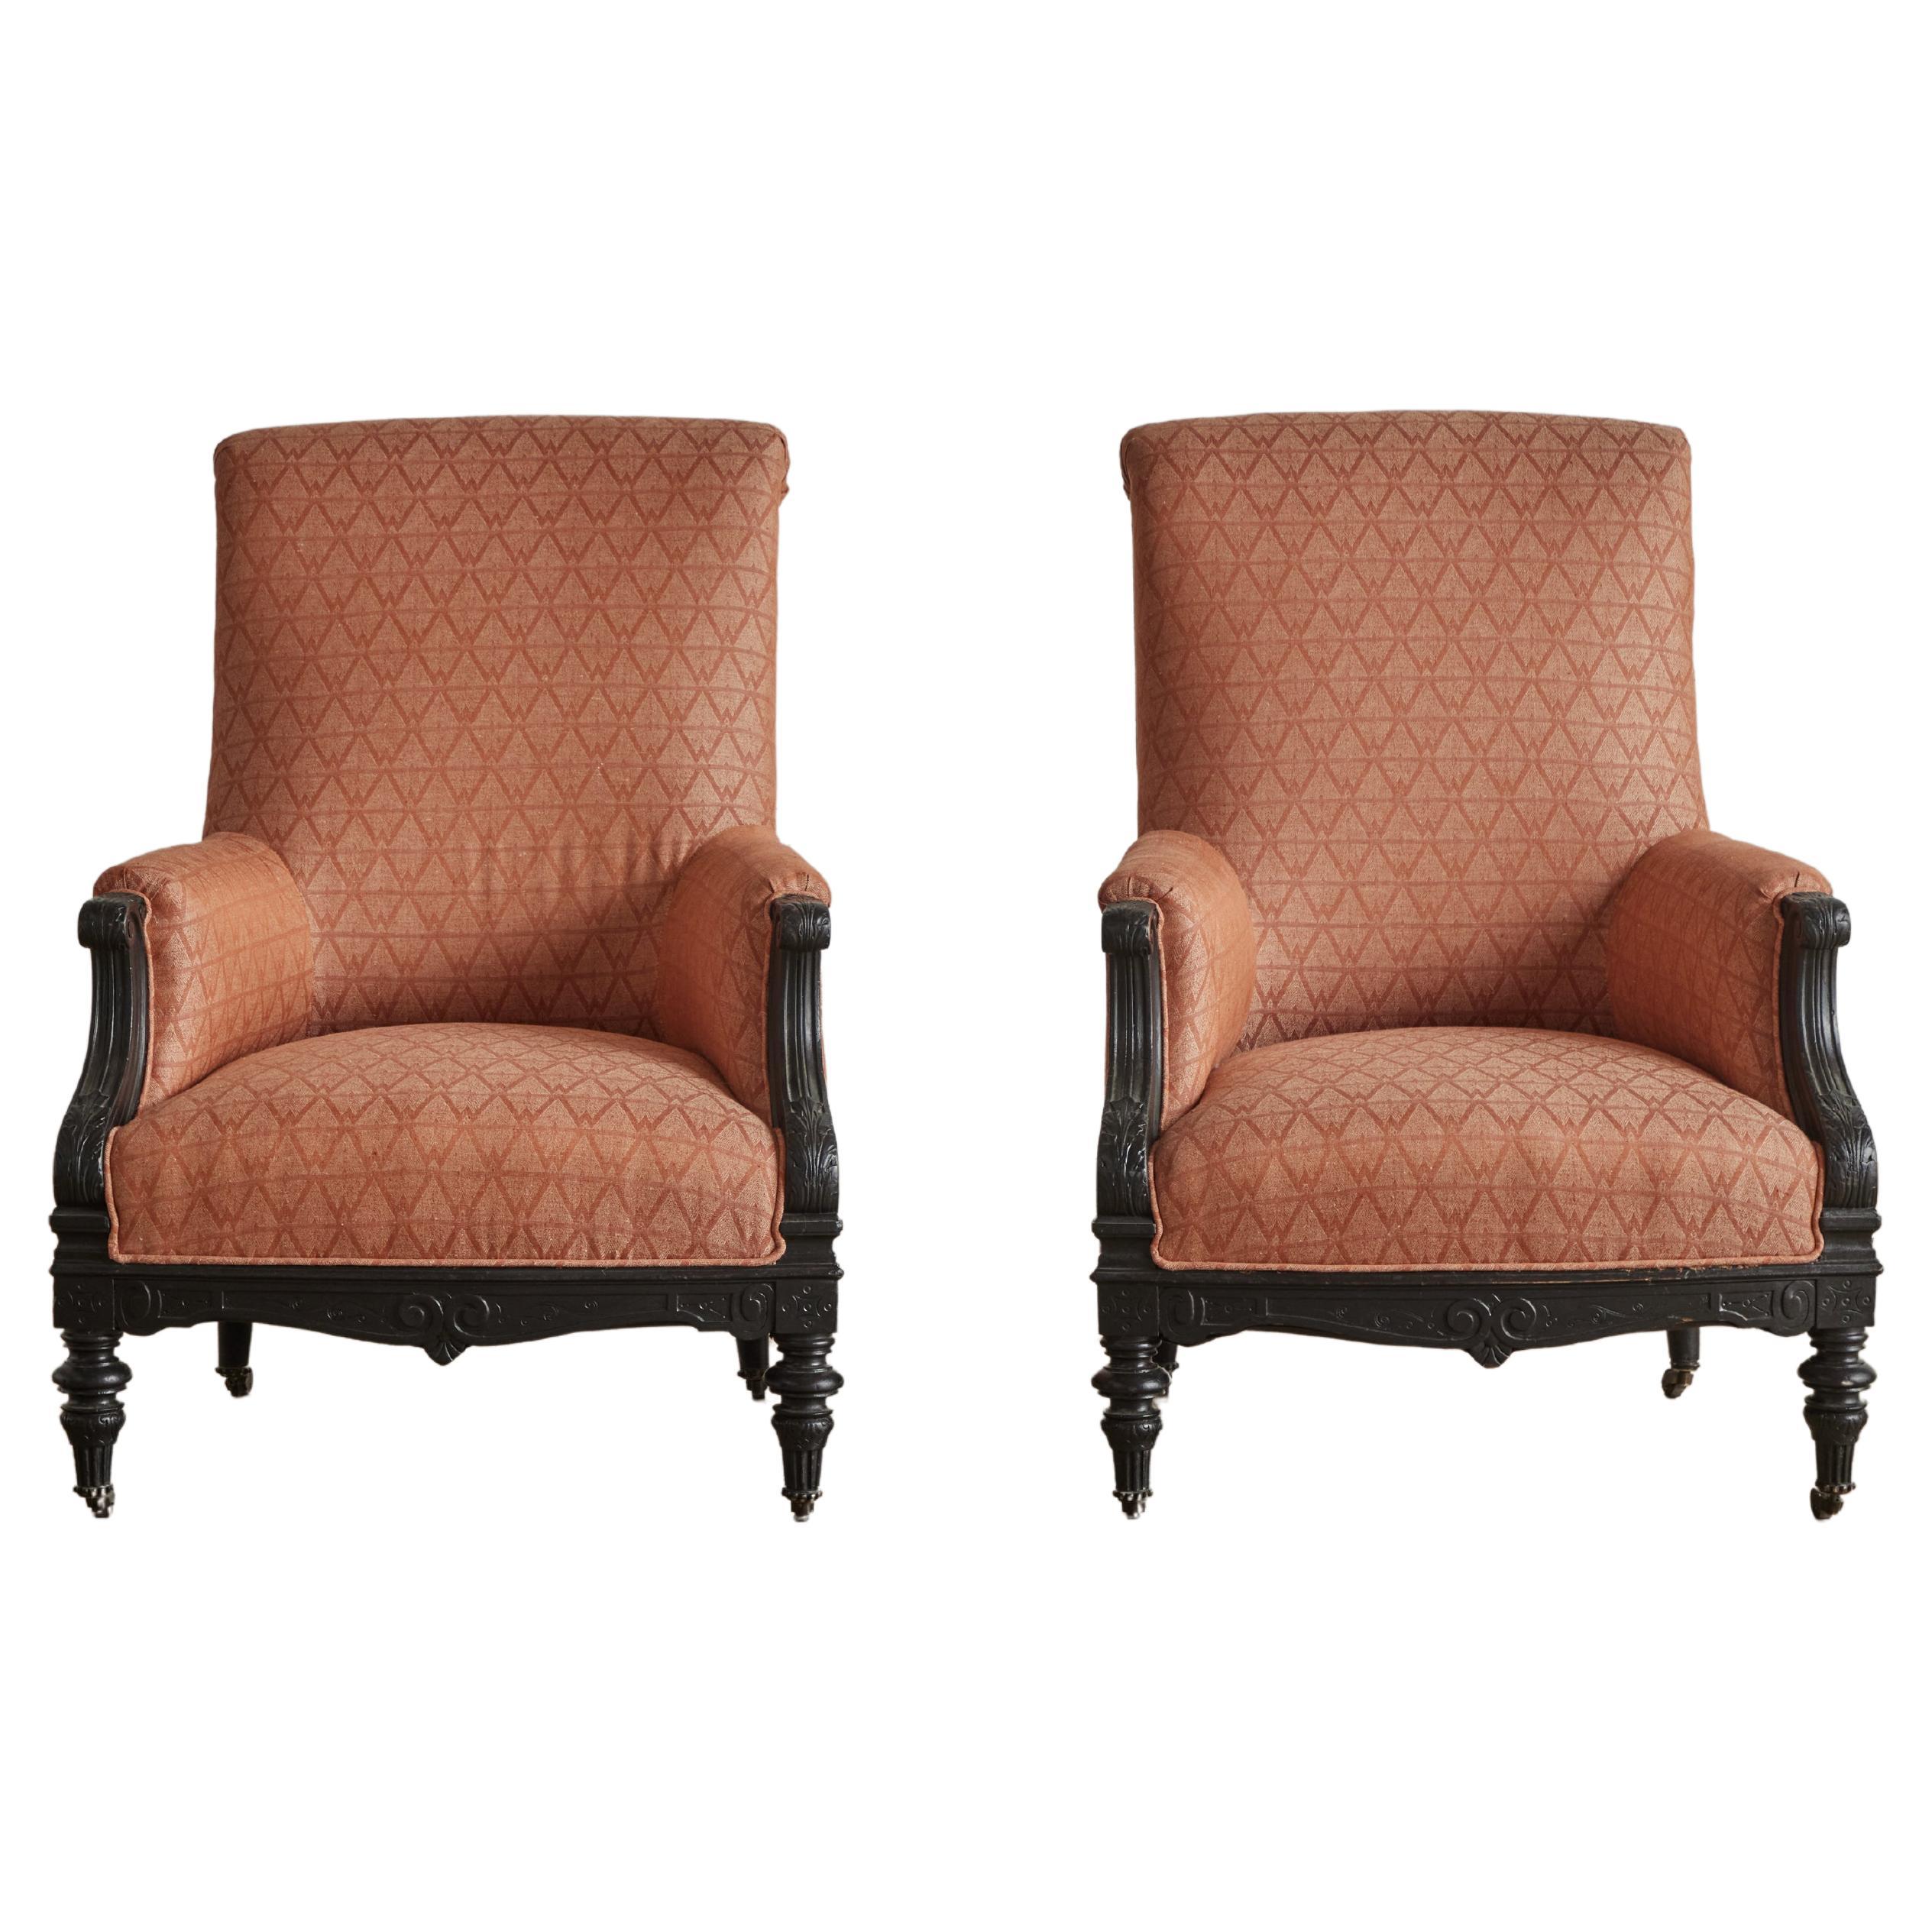 Pair of 19th Century Arm Chairs For Sale